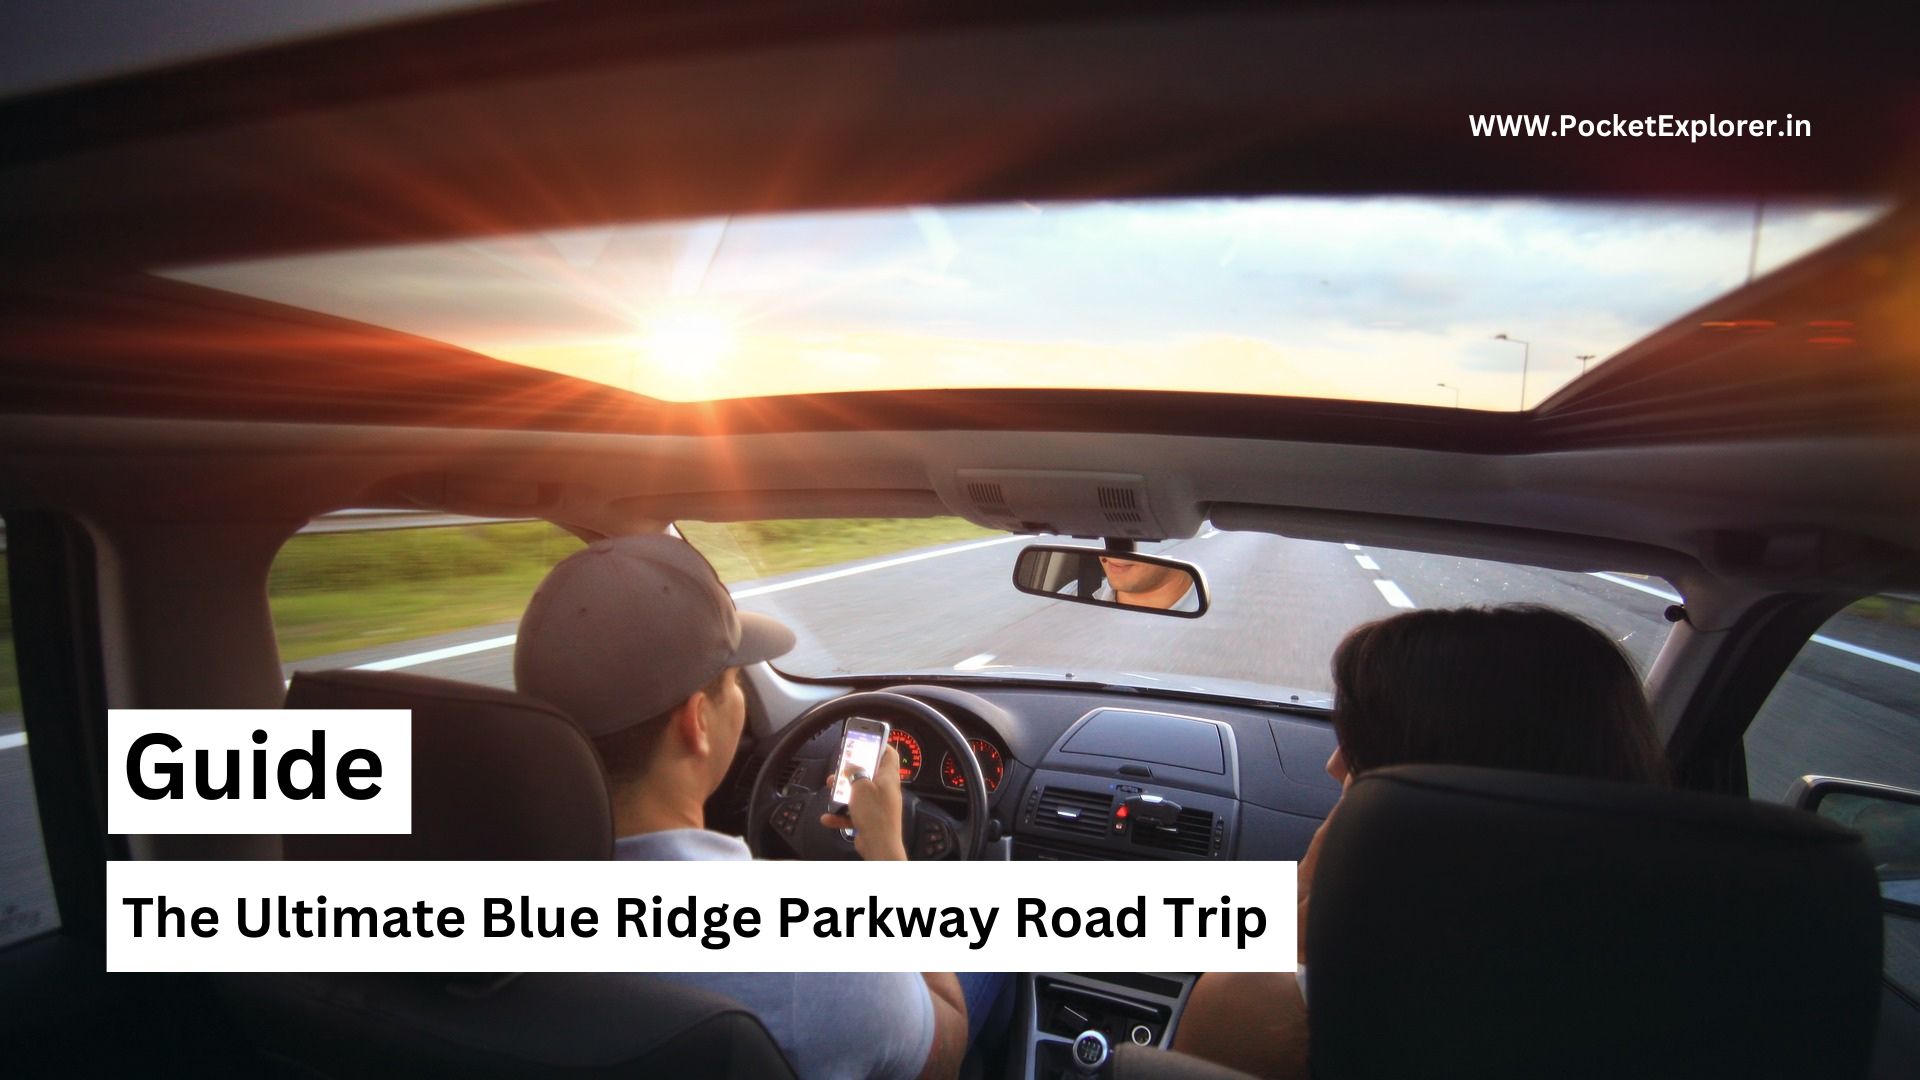 The Ultimate Blue Ridge Parkway Road Trip Guide